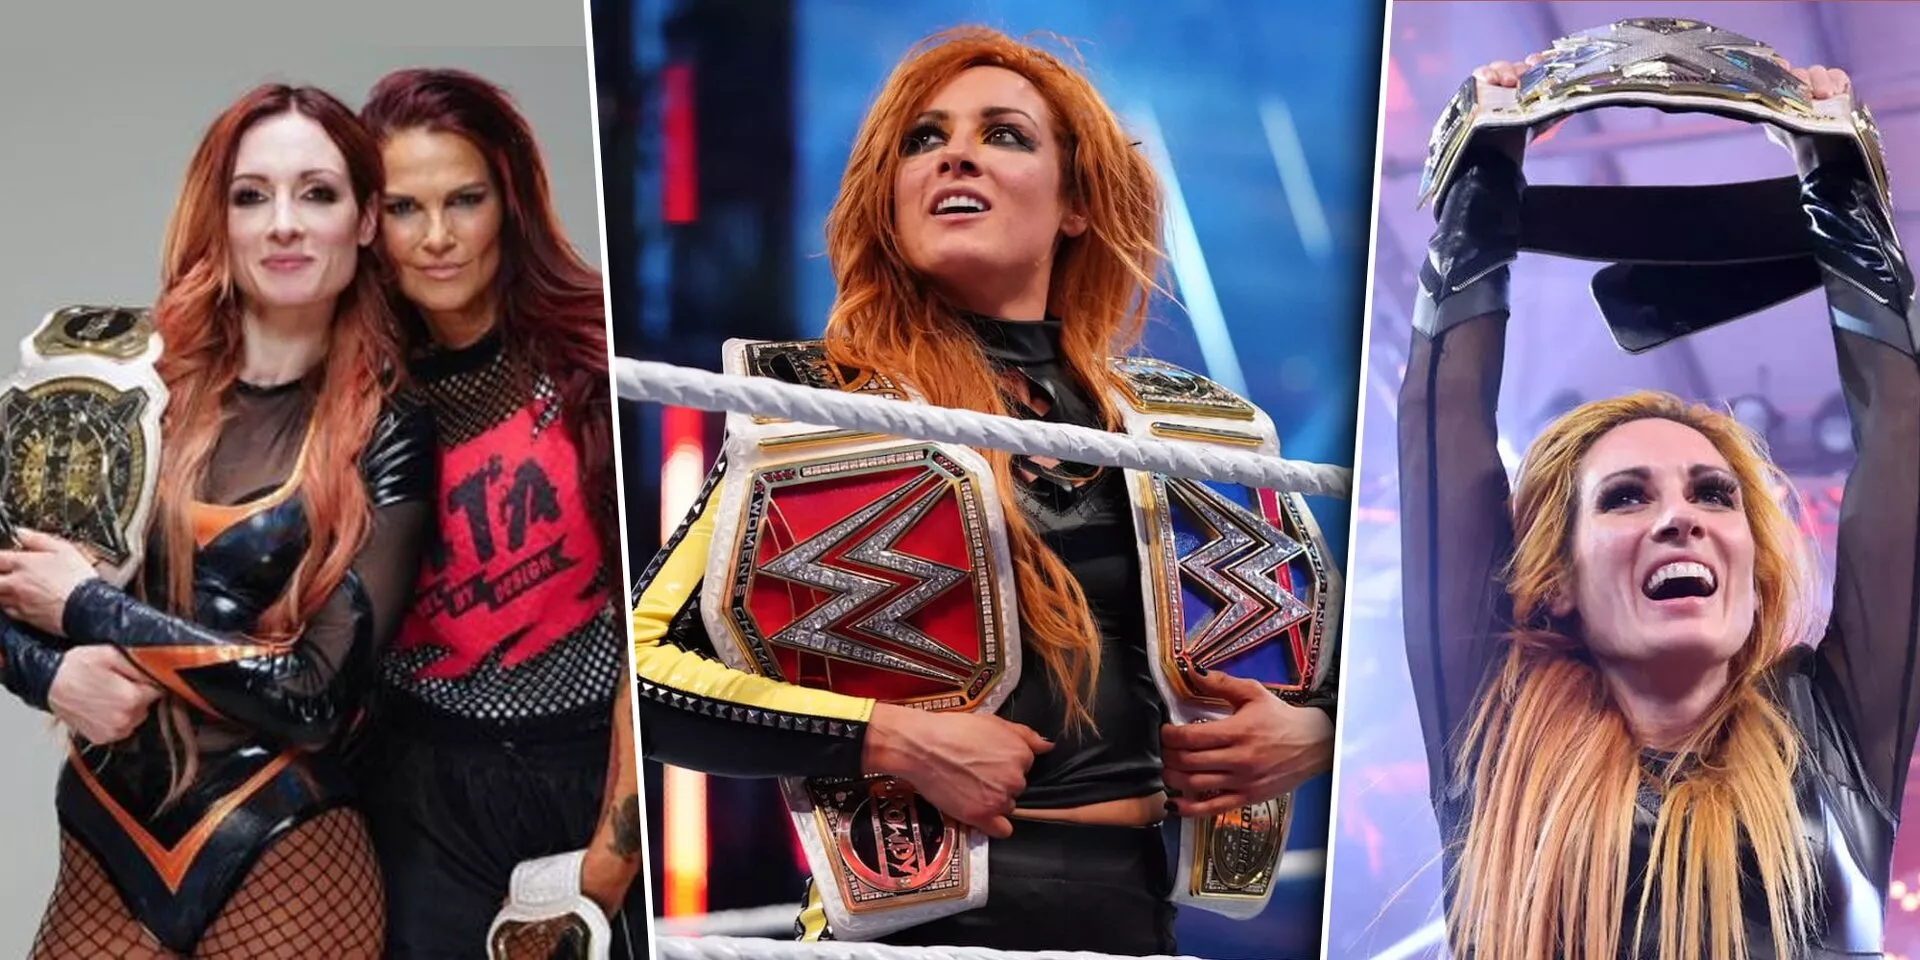 Becky Lynch On Winning The WWE Women's Tag Titles With Lita: I Think That  Was Never Meant To Be The Plan